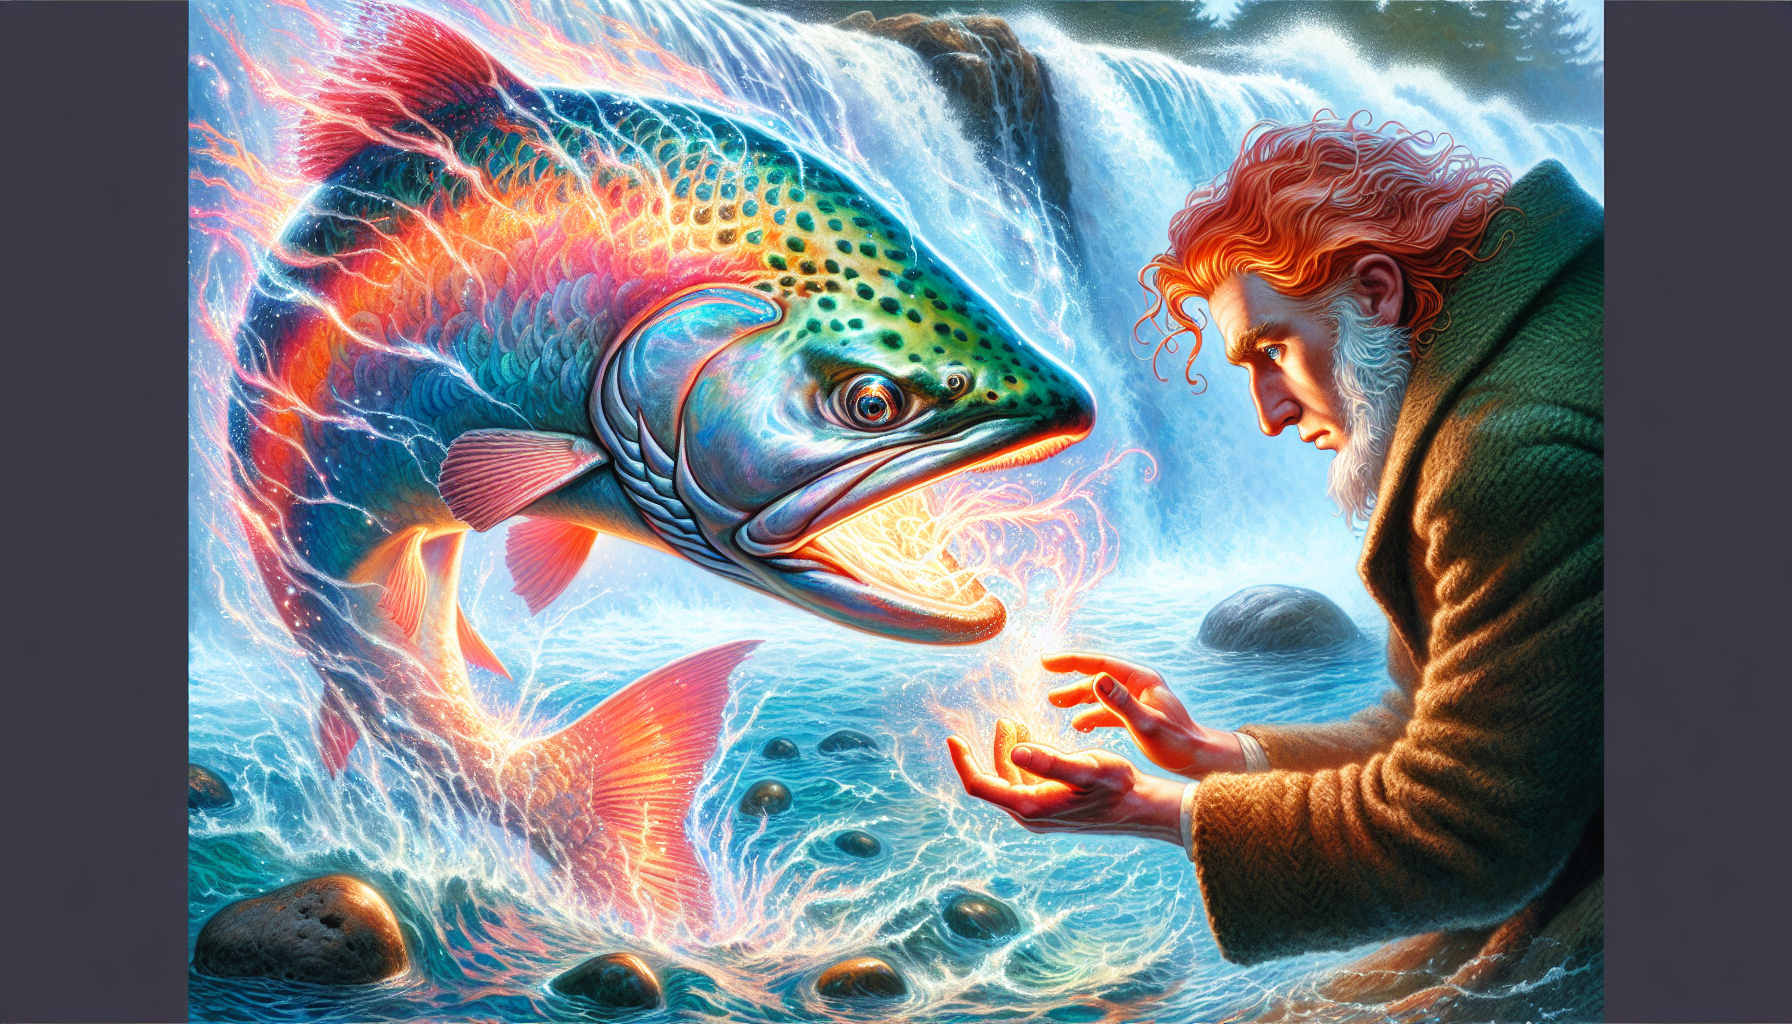 Illustration of Finn McCool gaining wisdom from the Salmon of Knowledge